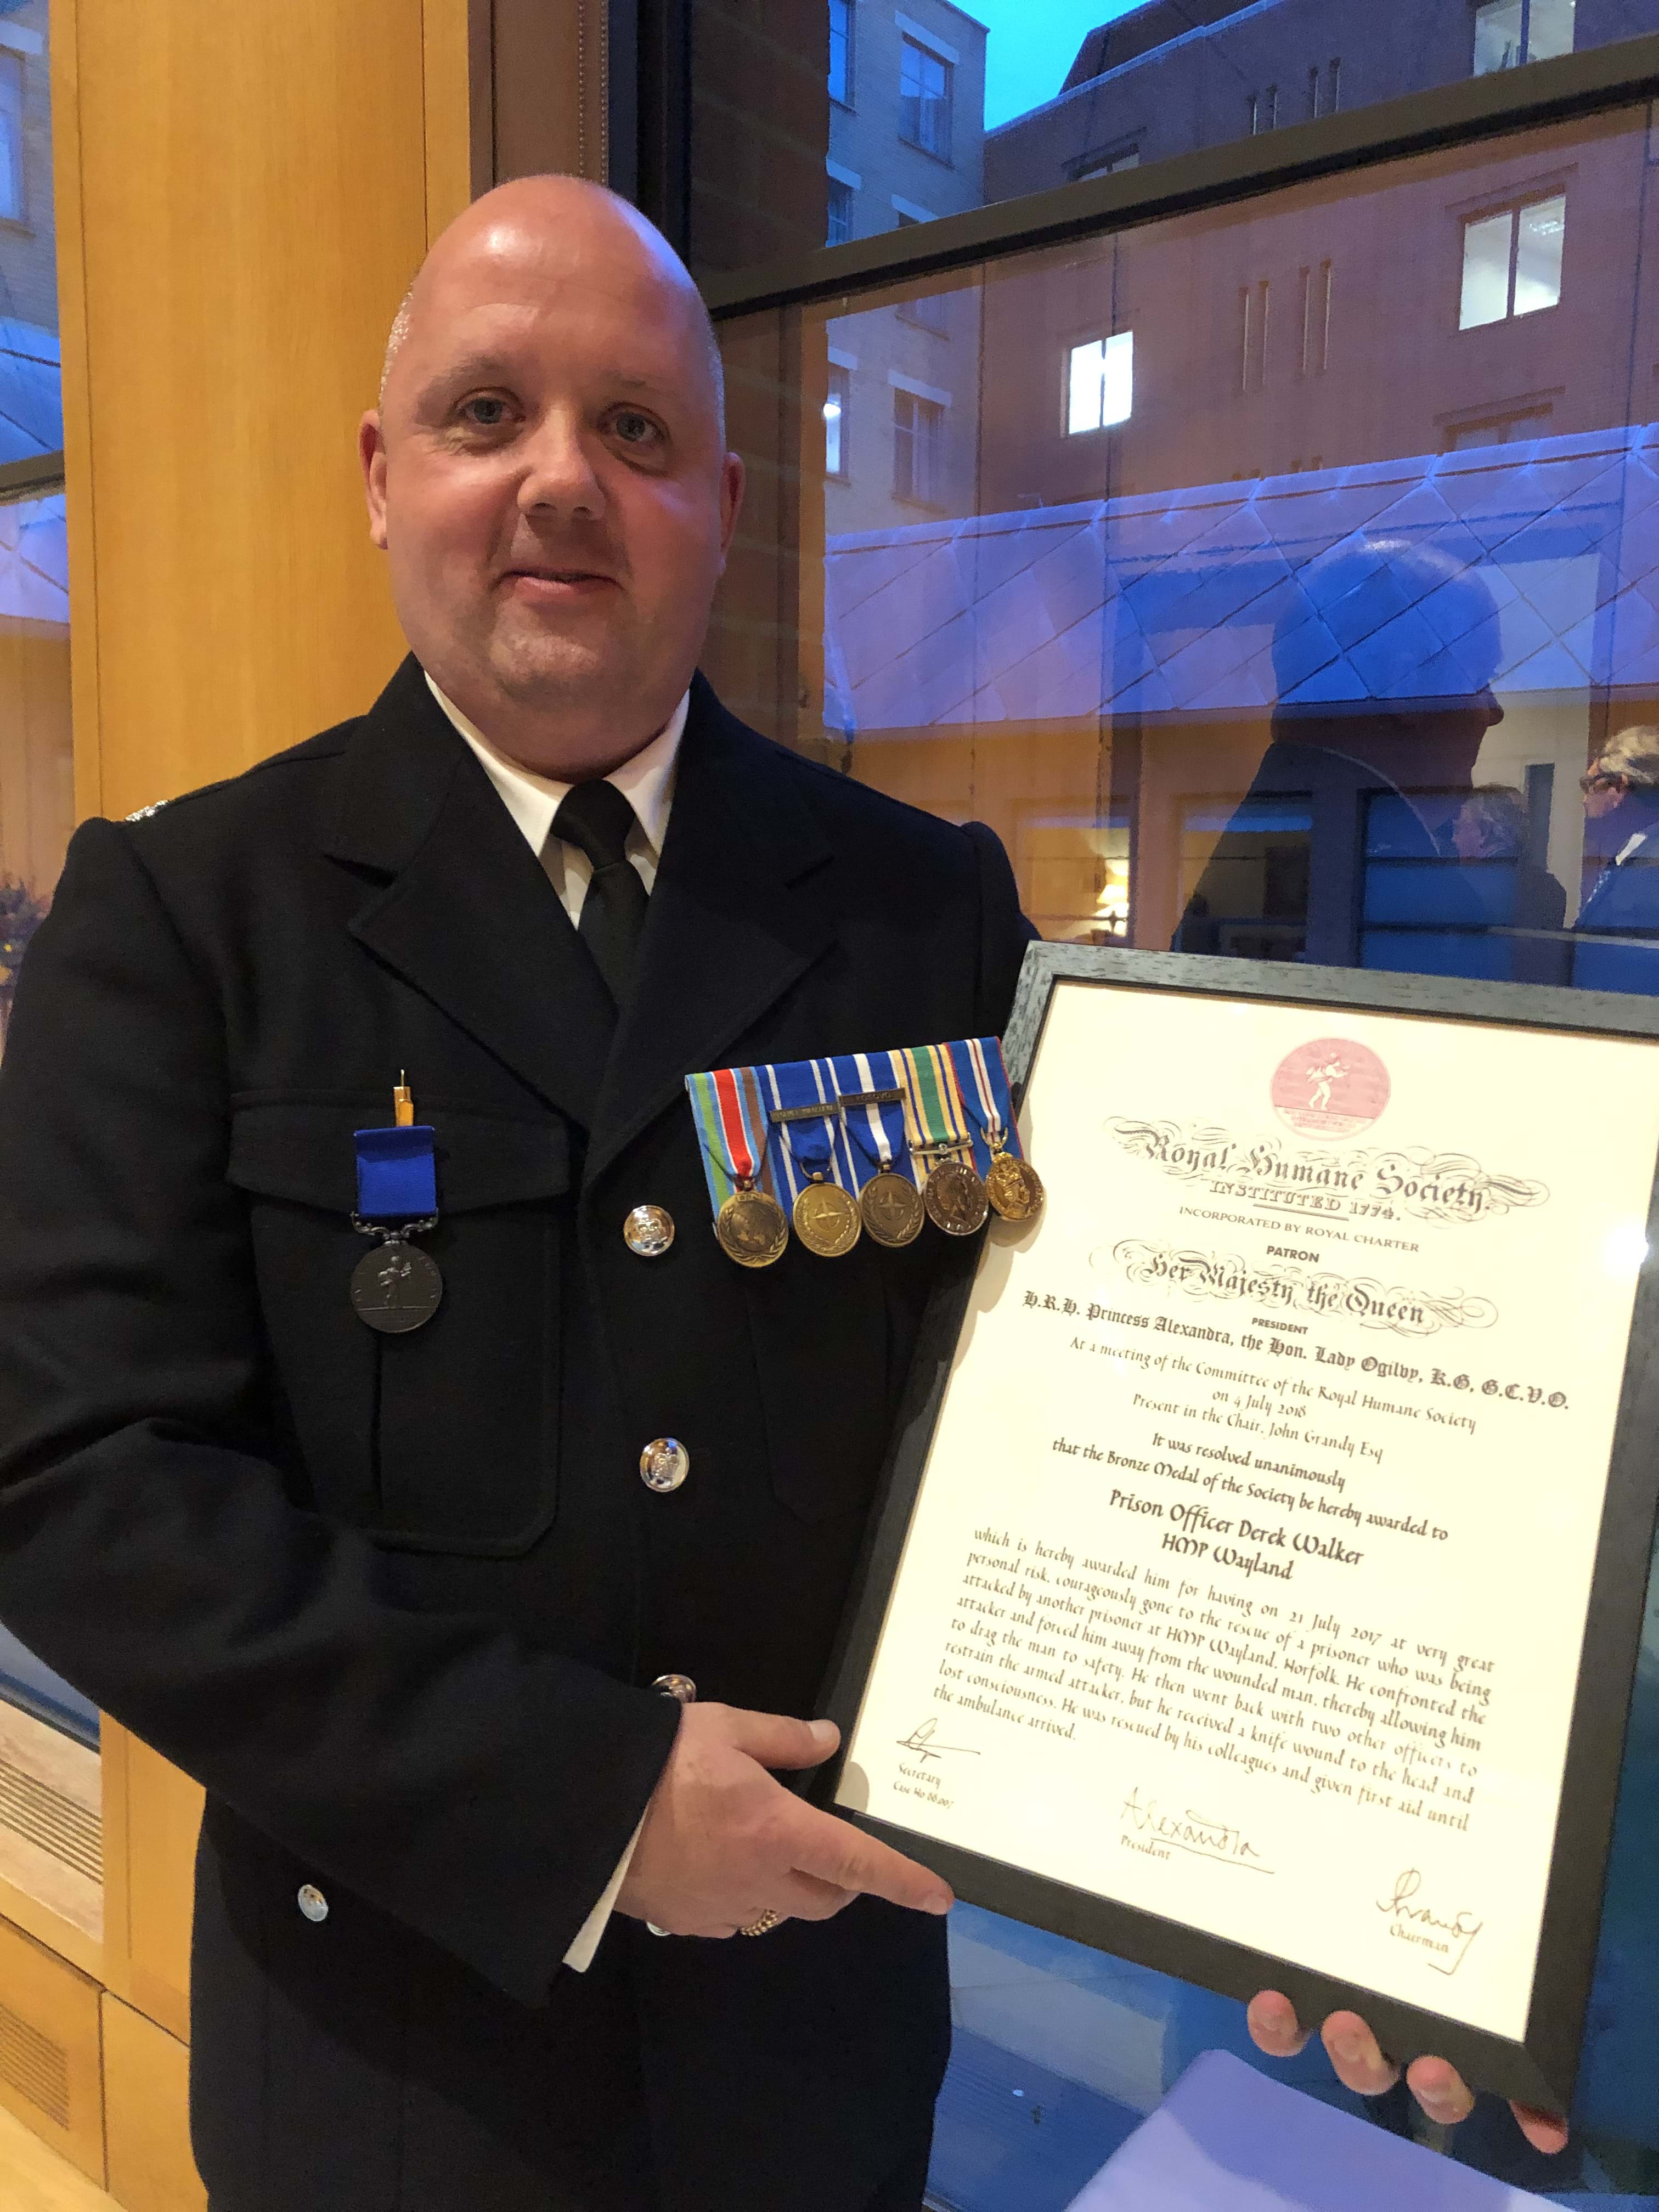 A prison officer holding a certificate for bravery